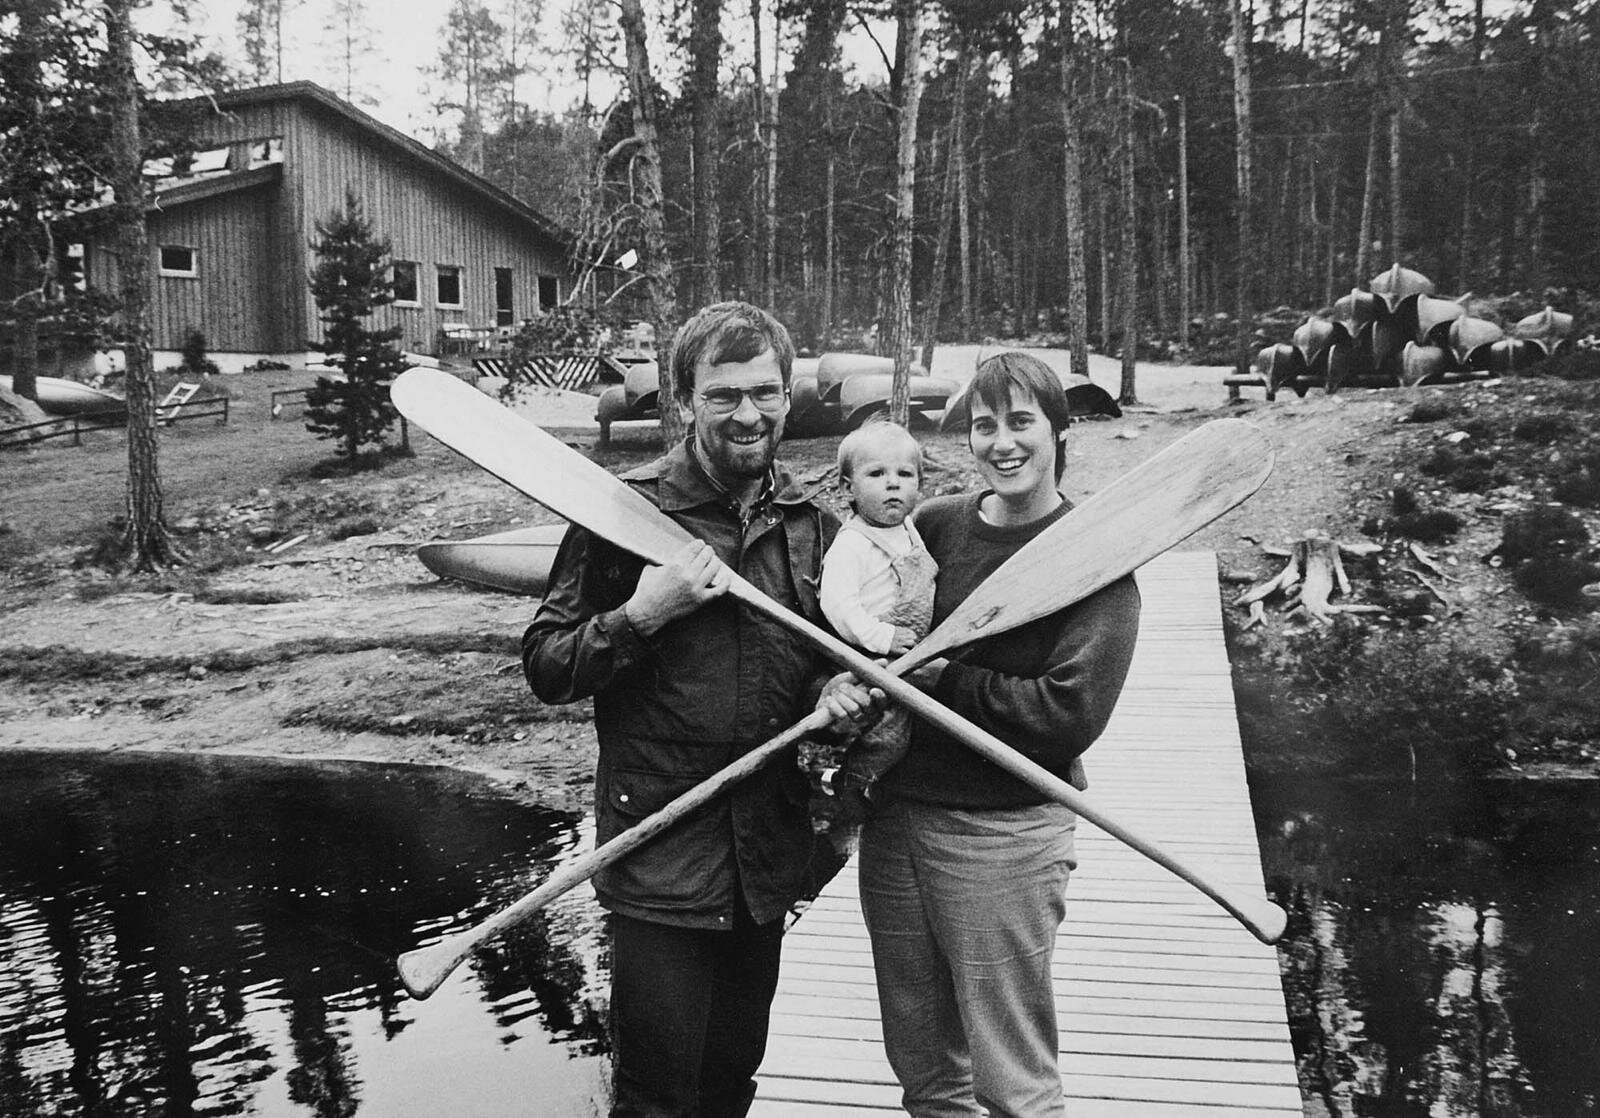  1986. From left: Bengt, Karin (1 year), Mieke 